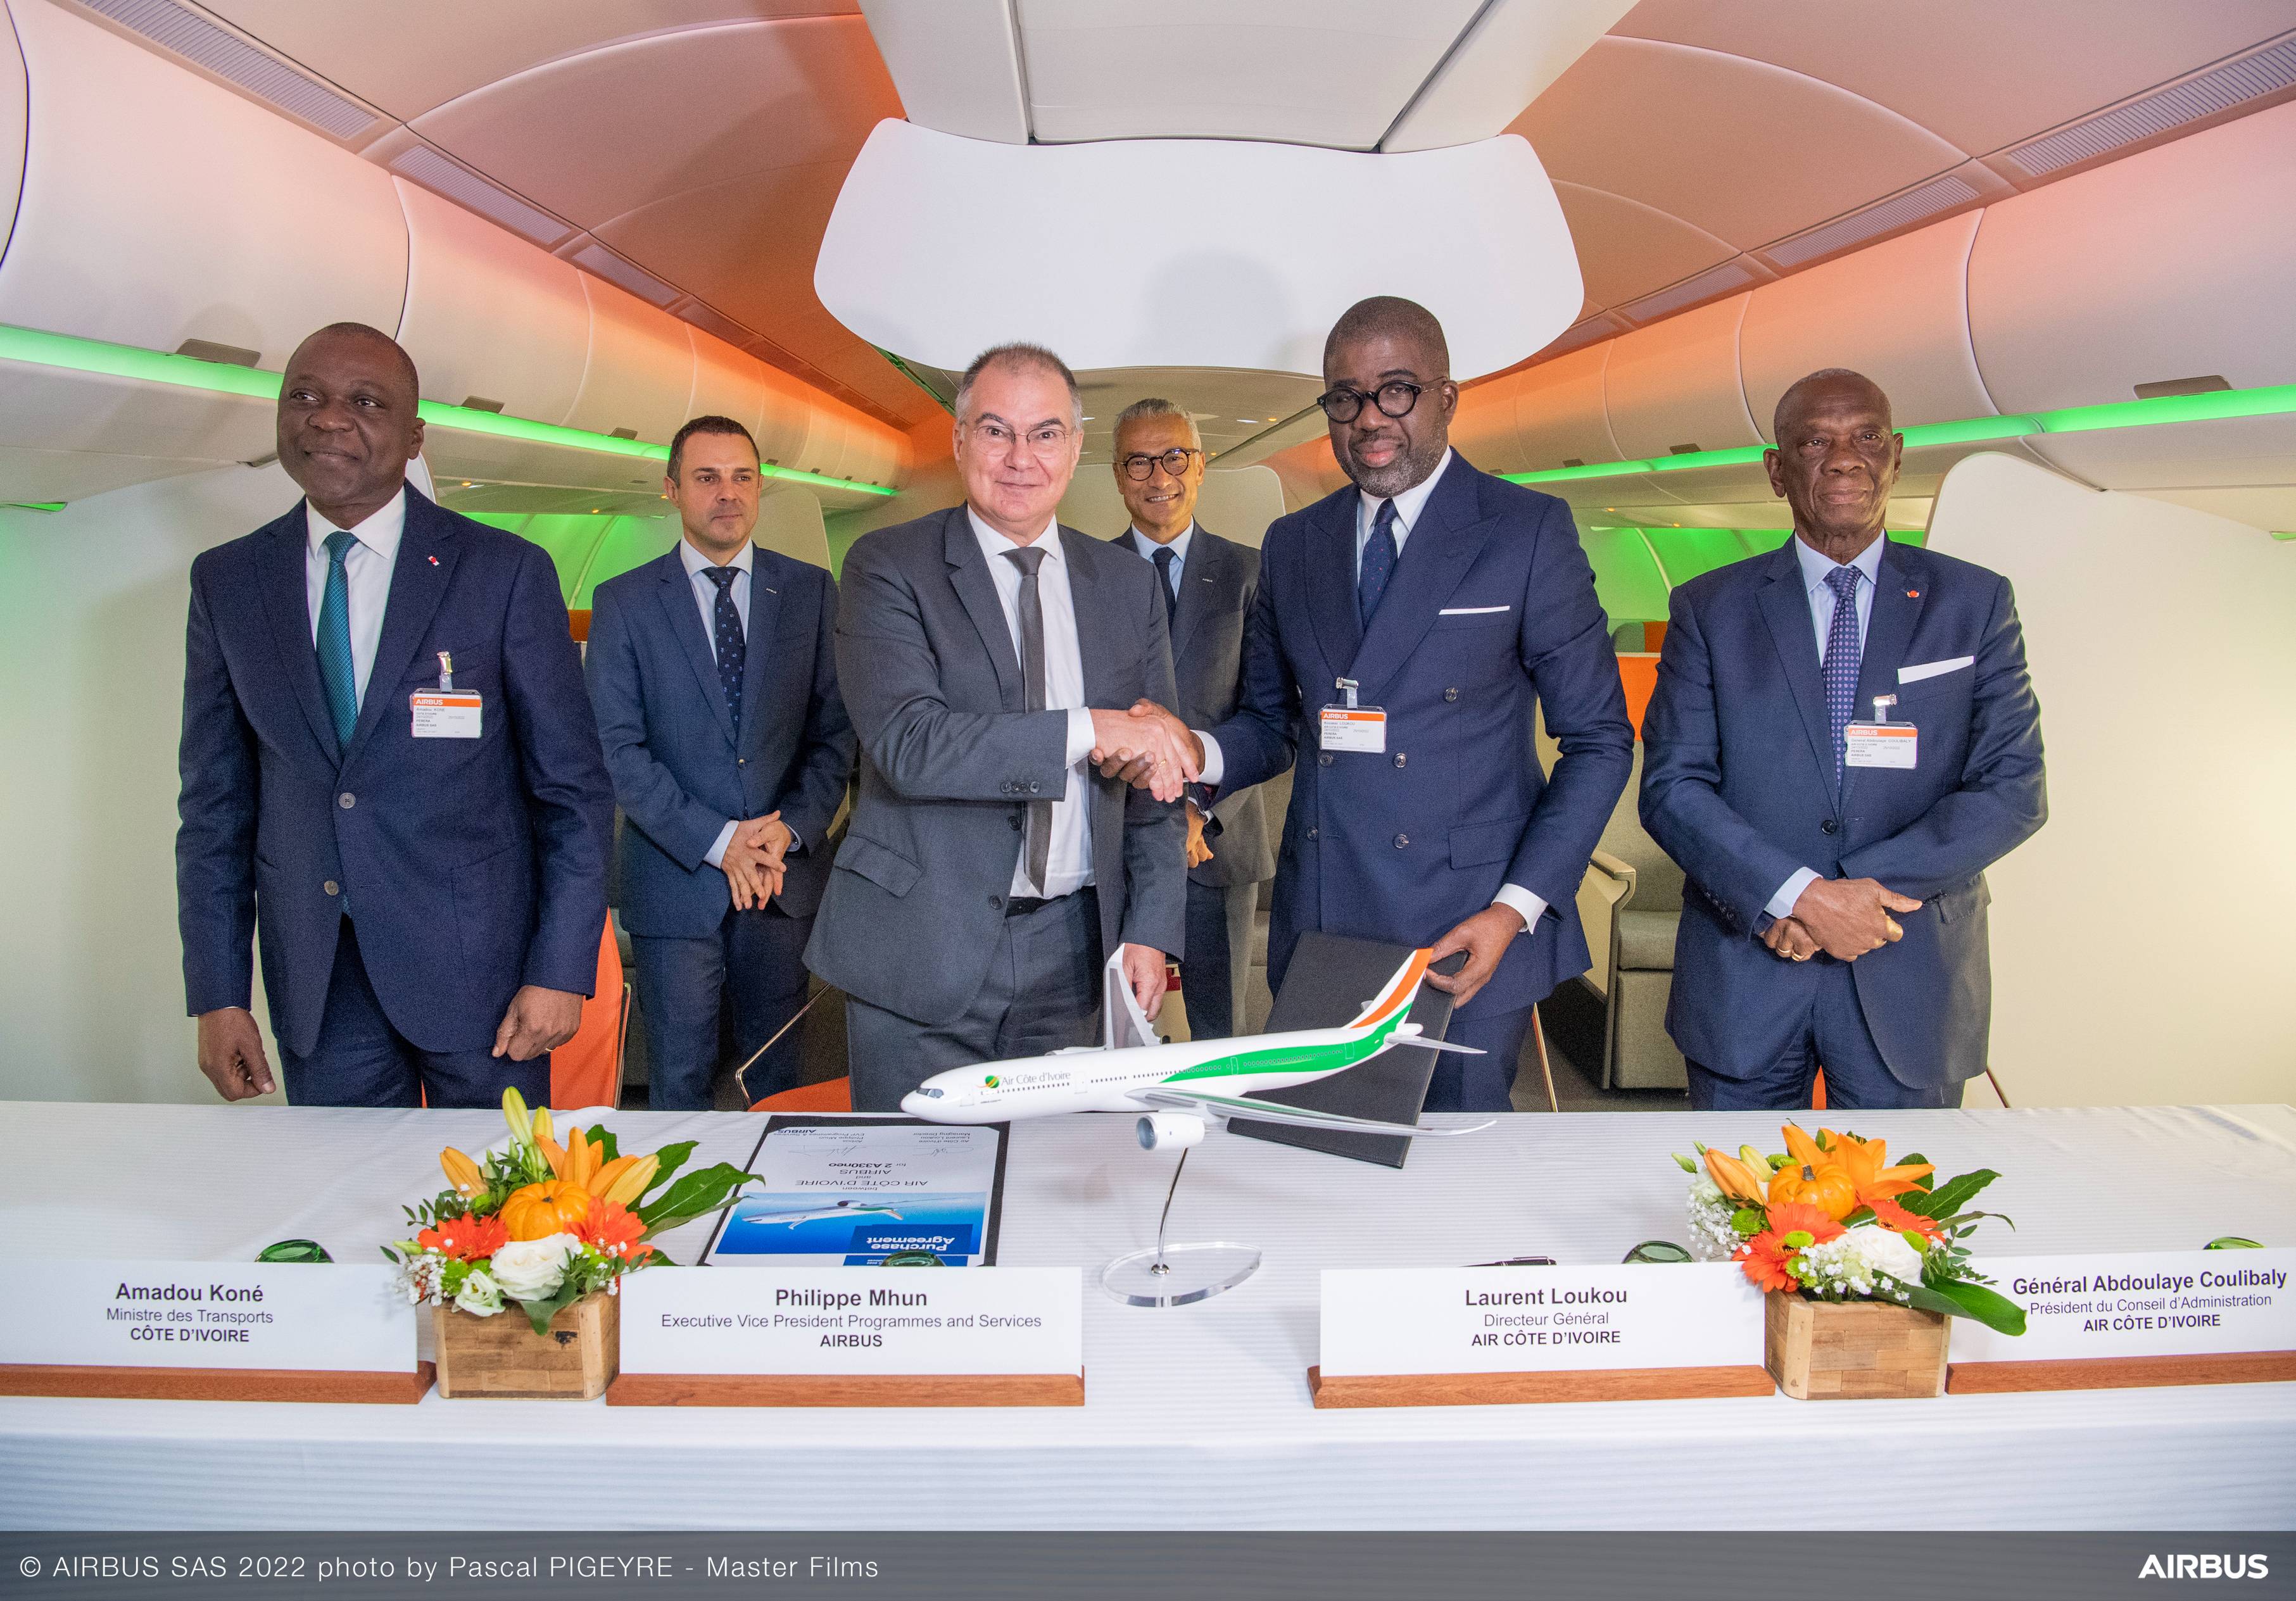 Air Côte d’Ivoire expands its fleet with a firm order for two A330neo aircraft